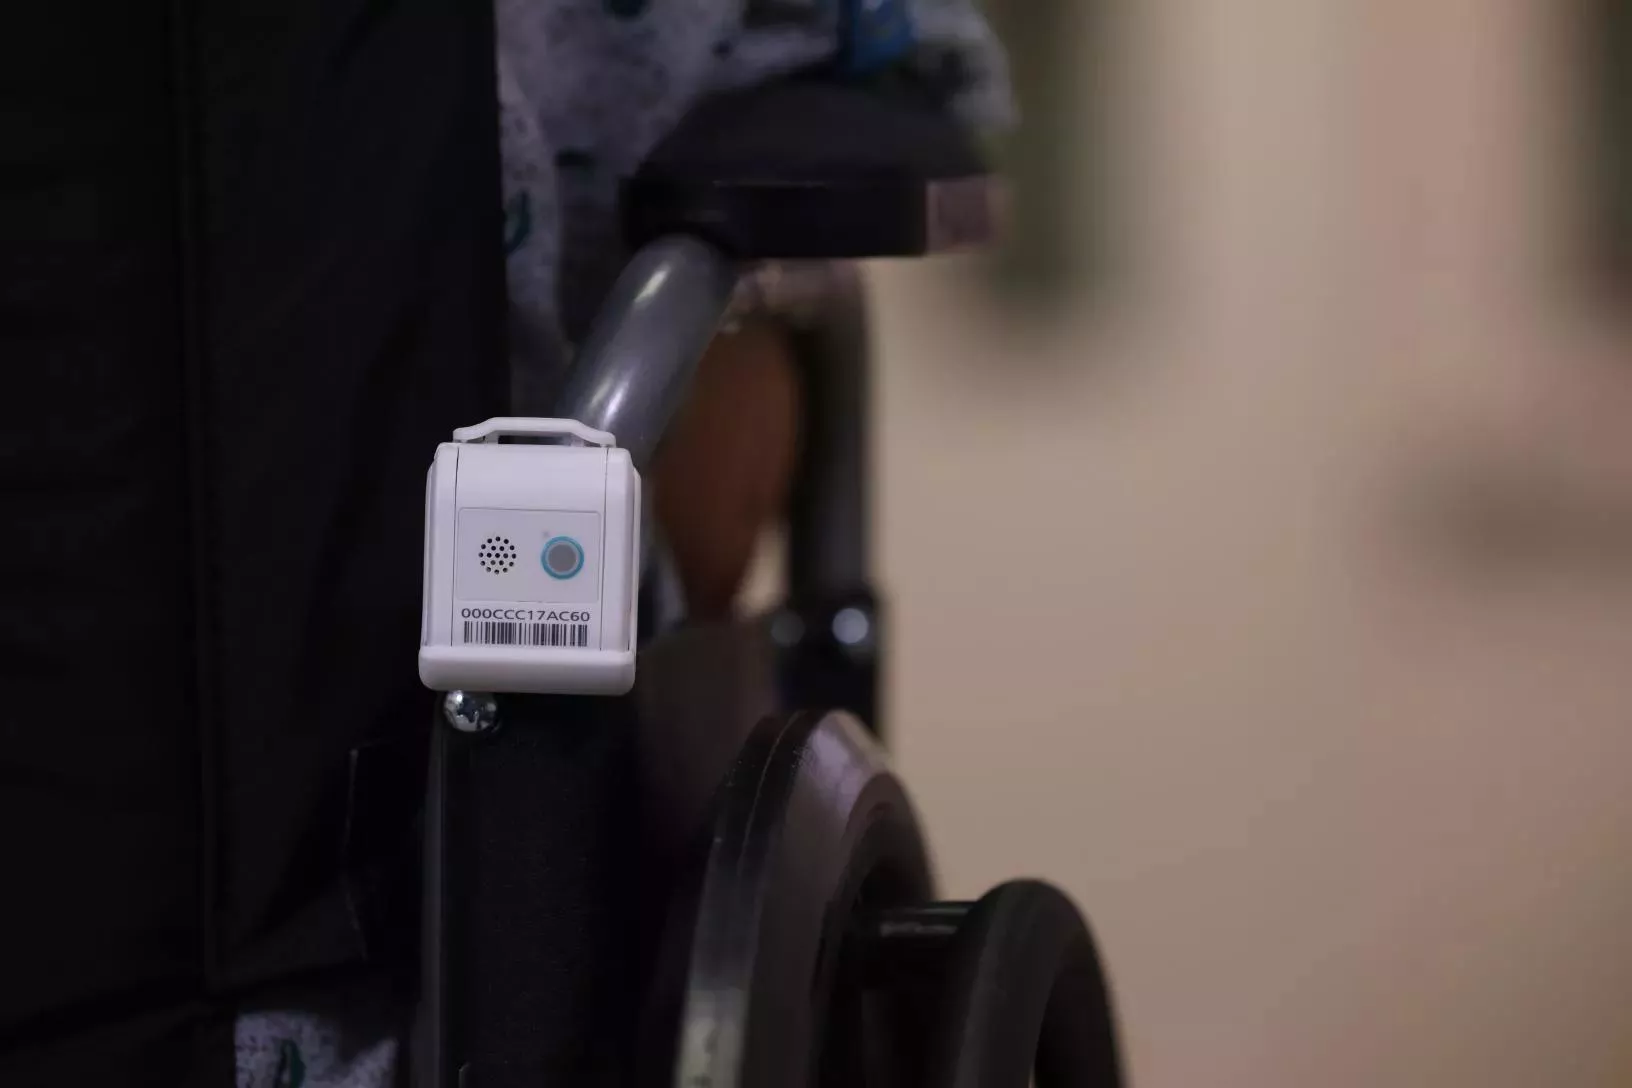 Securitas Healthcare's T12s Asset Management badge attached to the back of a wheelchair.